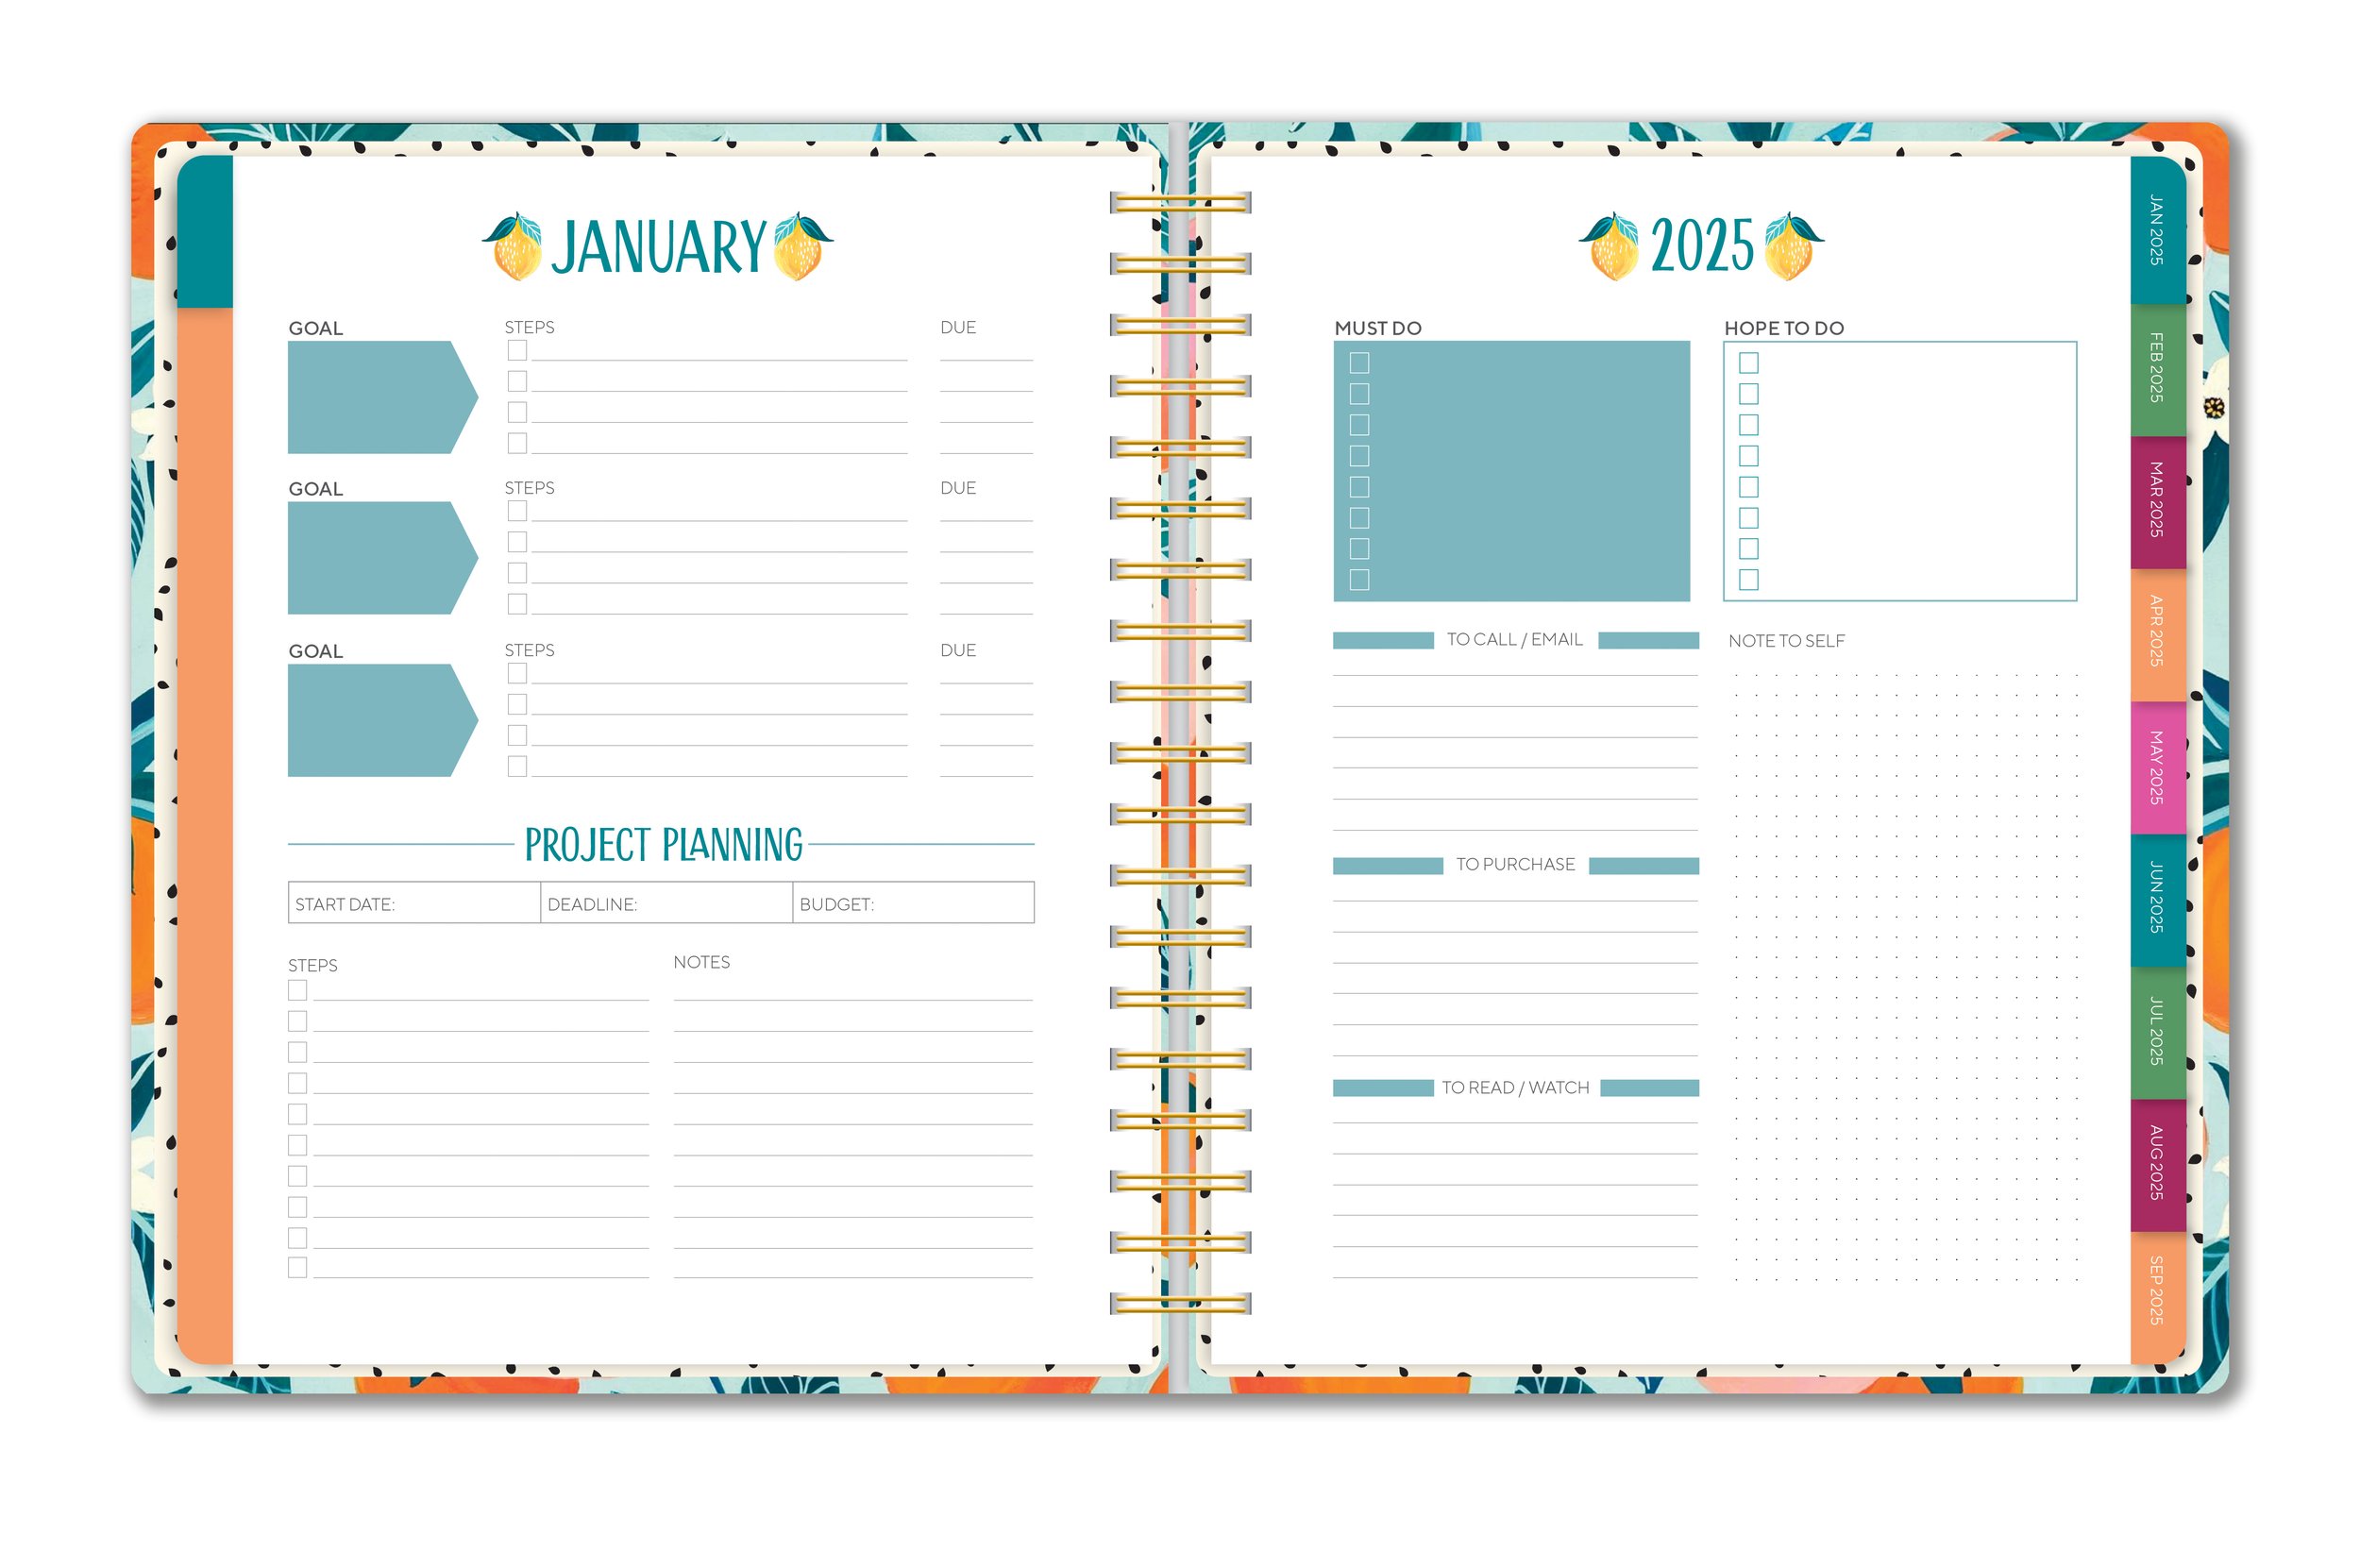 CHL-4206 Fruits_Deluxe Planner_Planning spread.jpg